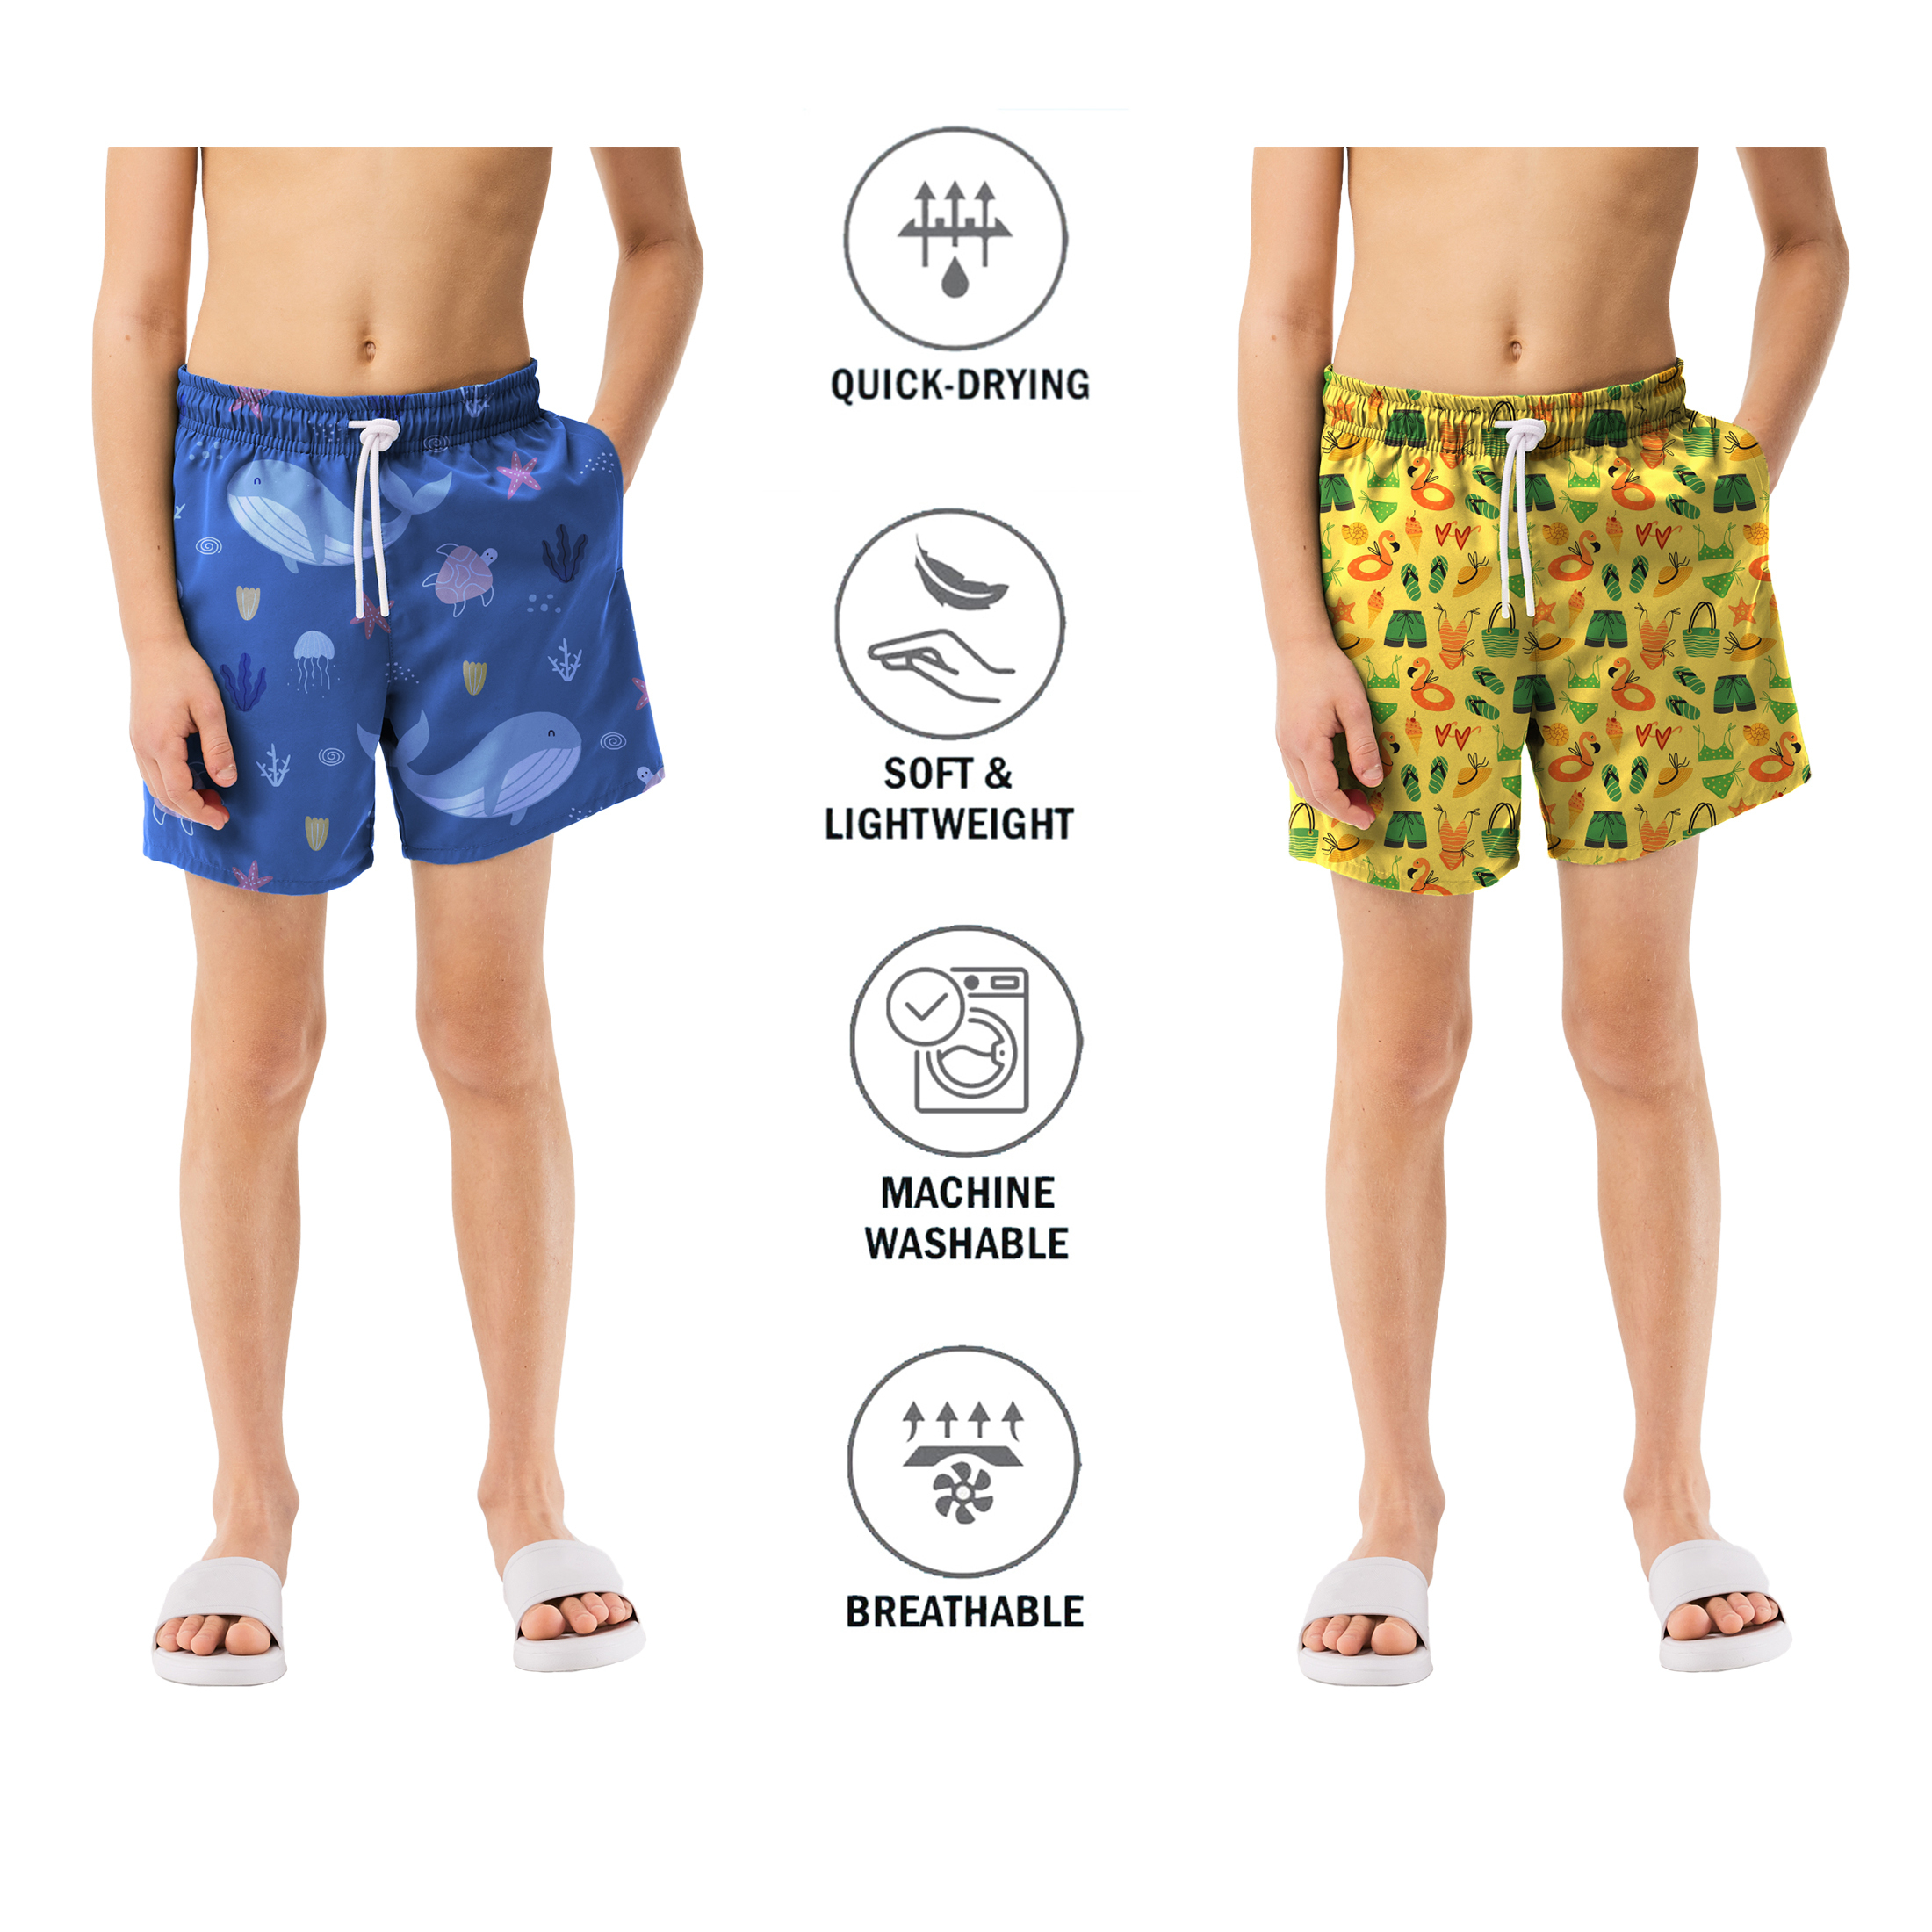 4-Pack Boy's Beach Summer Swim Trunk Shorts Printed Bathing Quick Dry UPF 50+ Comfy Swimsuit - S